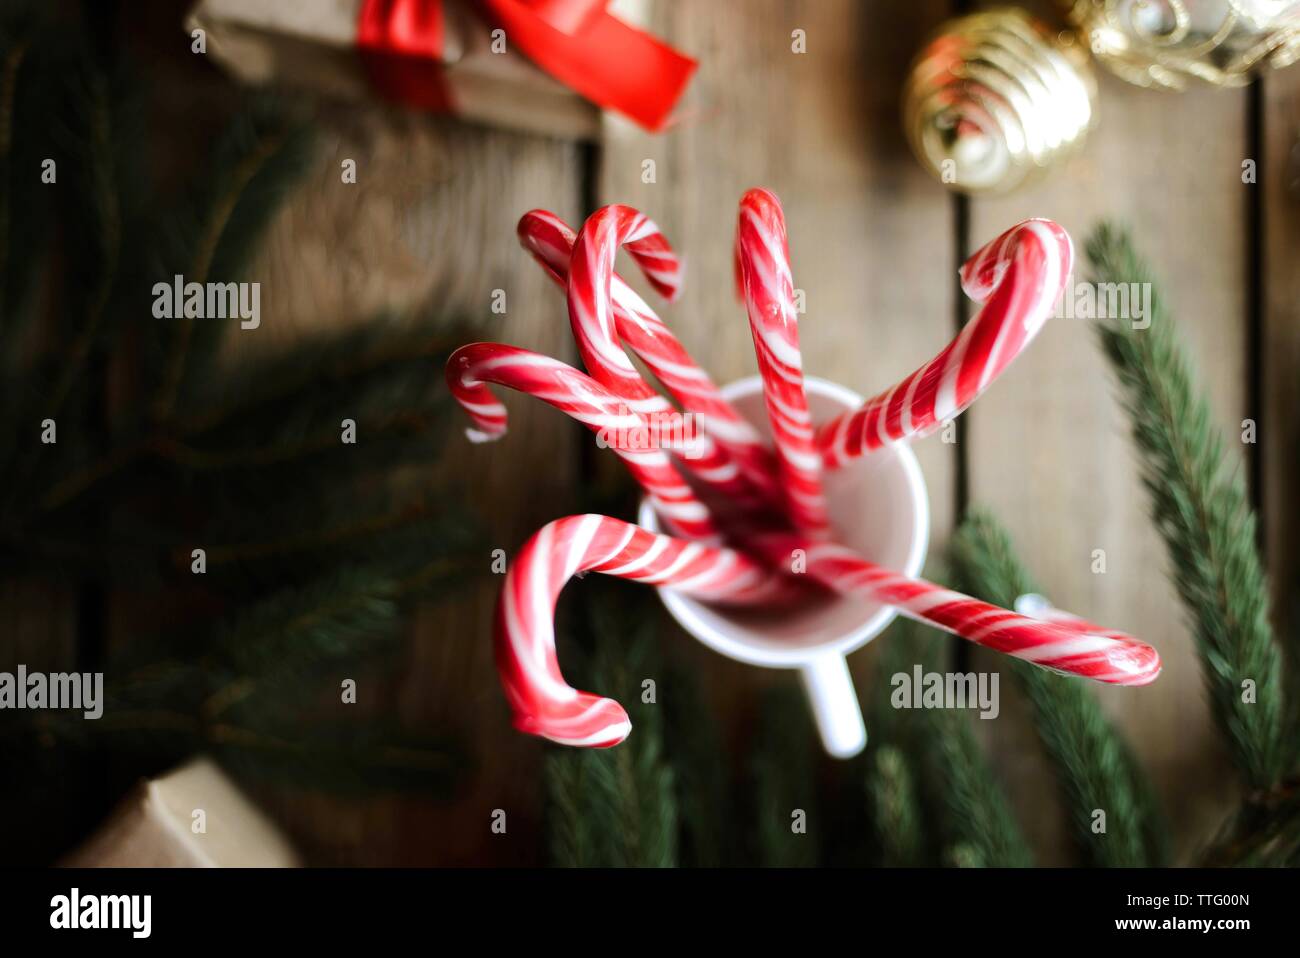 Close-up of candy canes in cup by baubles and twig on wooden table Stock Photo